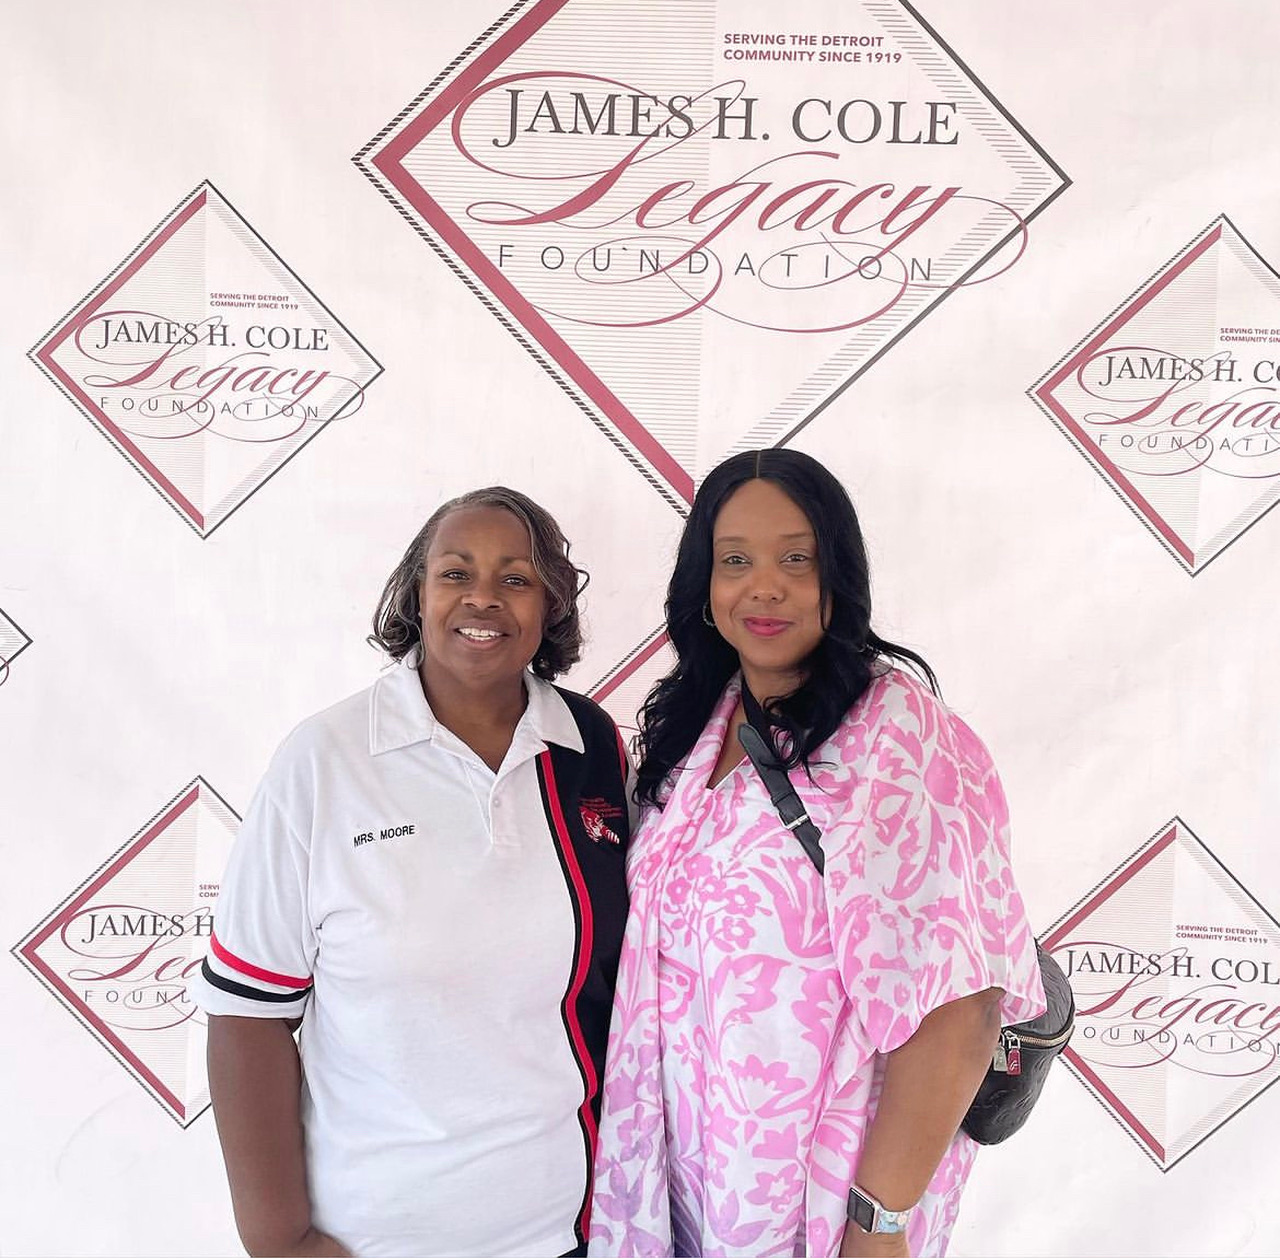 Two women standing behind James Cole Legacy Foundation sign